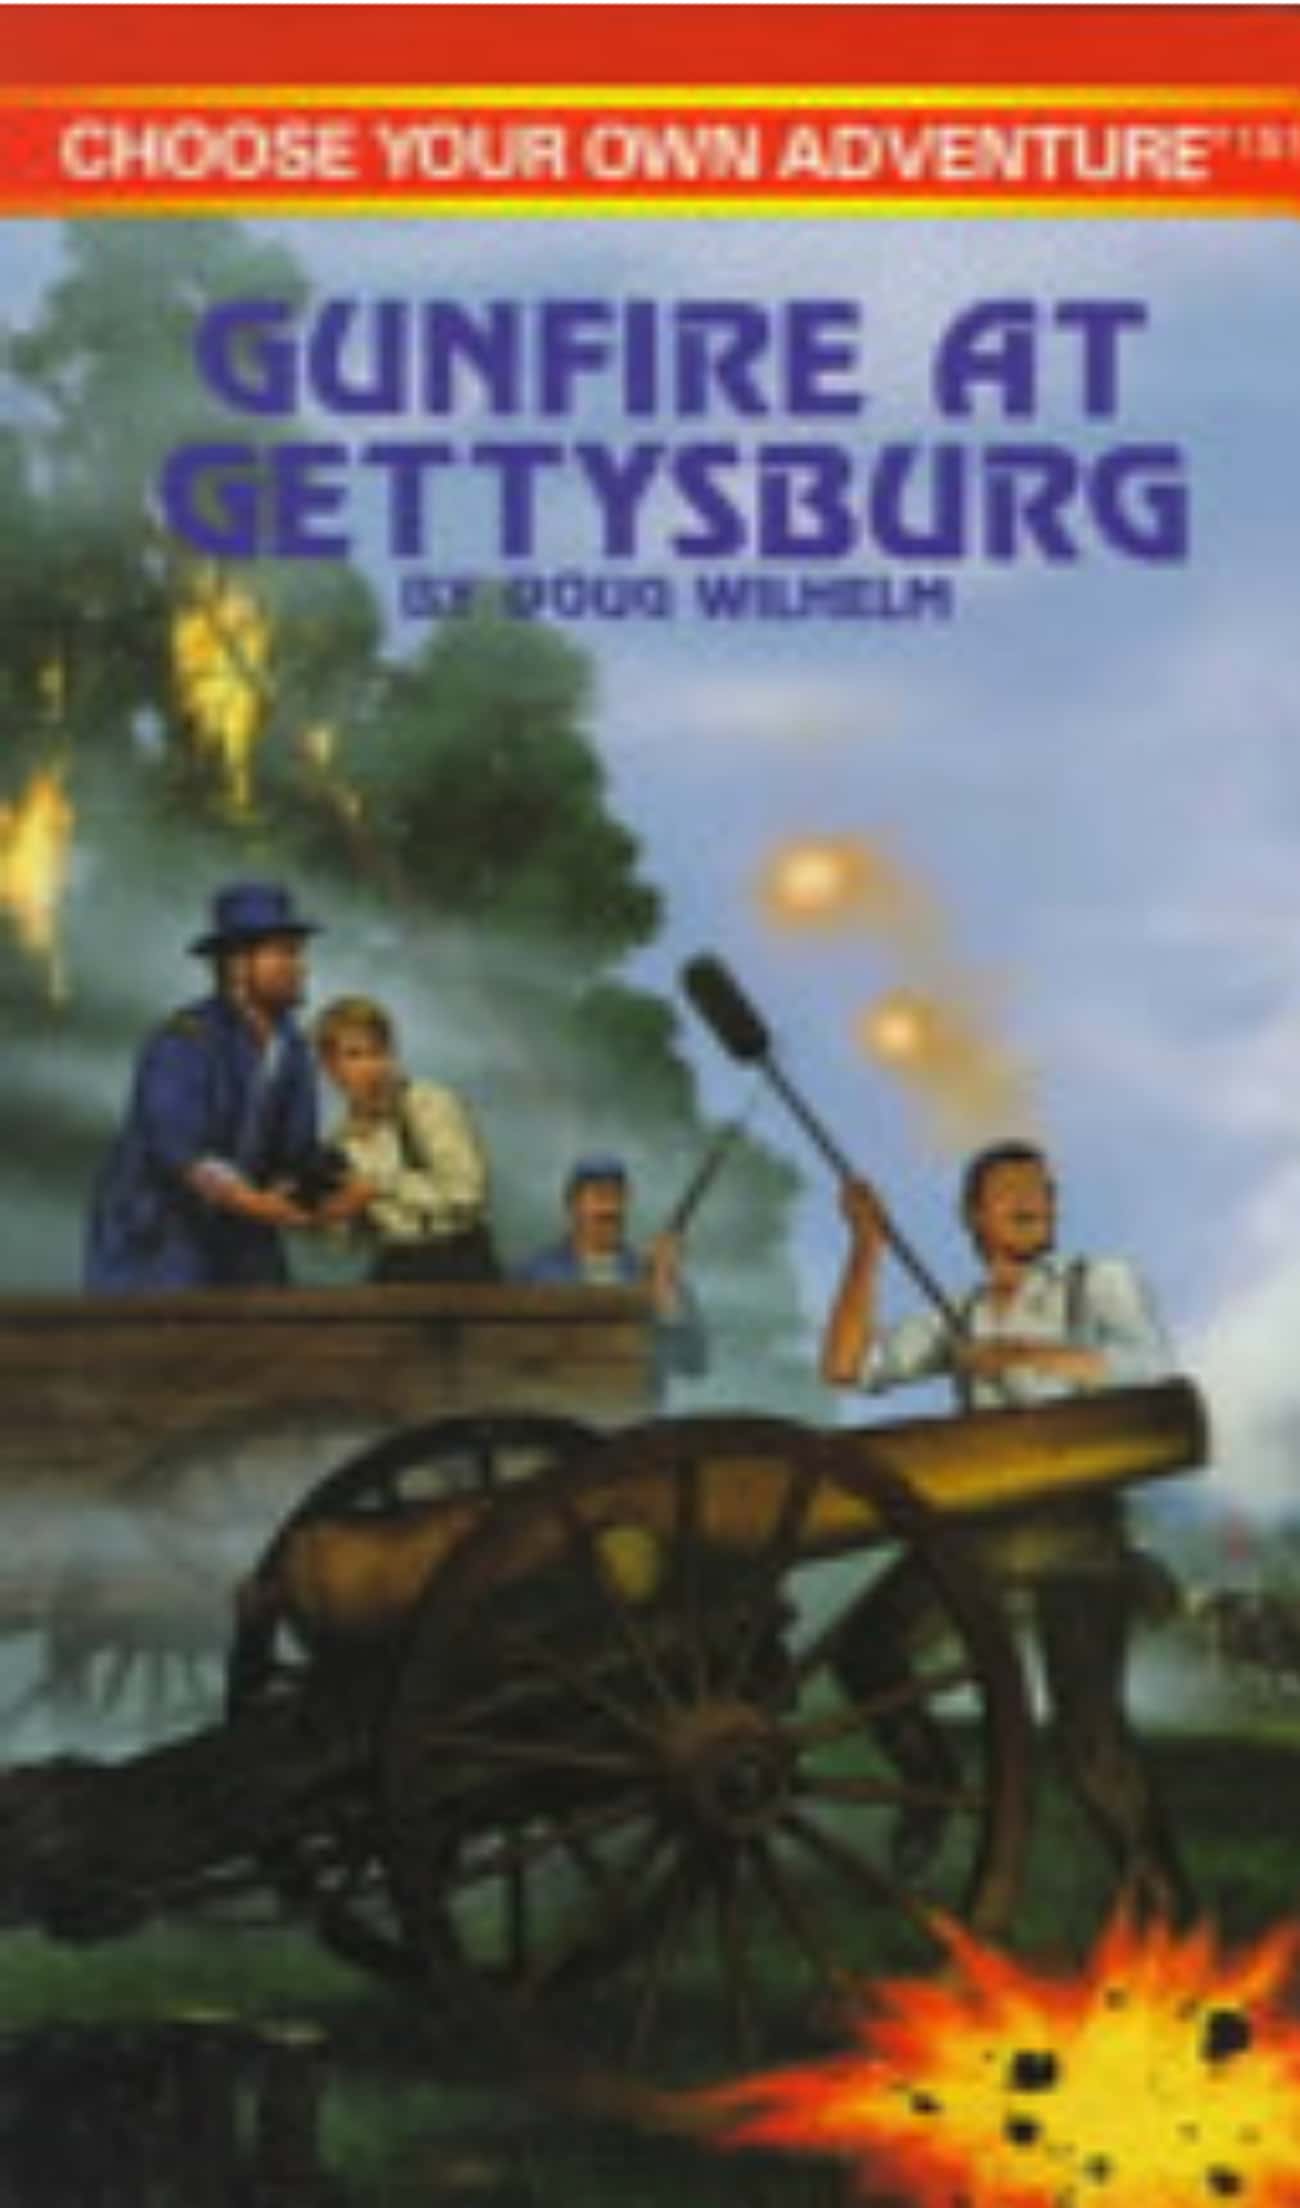 &#39;Gunfire At Gettysburg&#39; Asks You To Condone Slavery